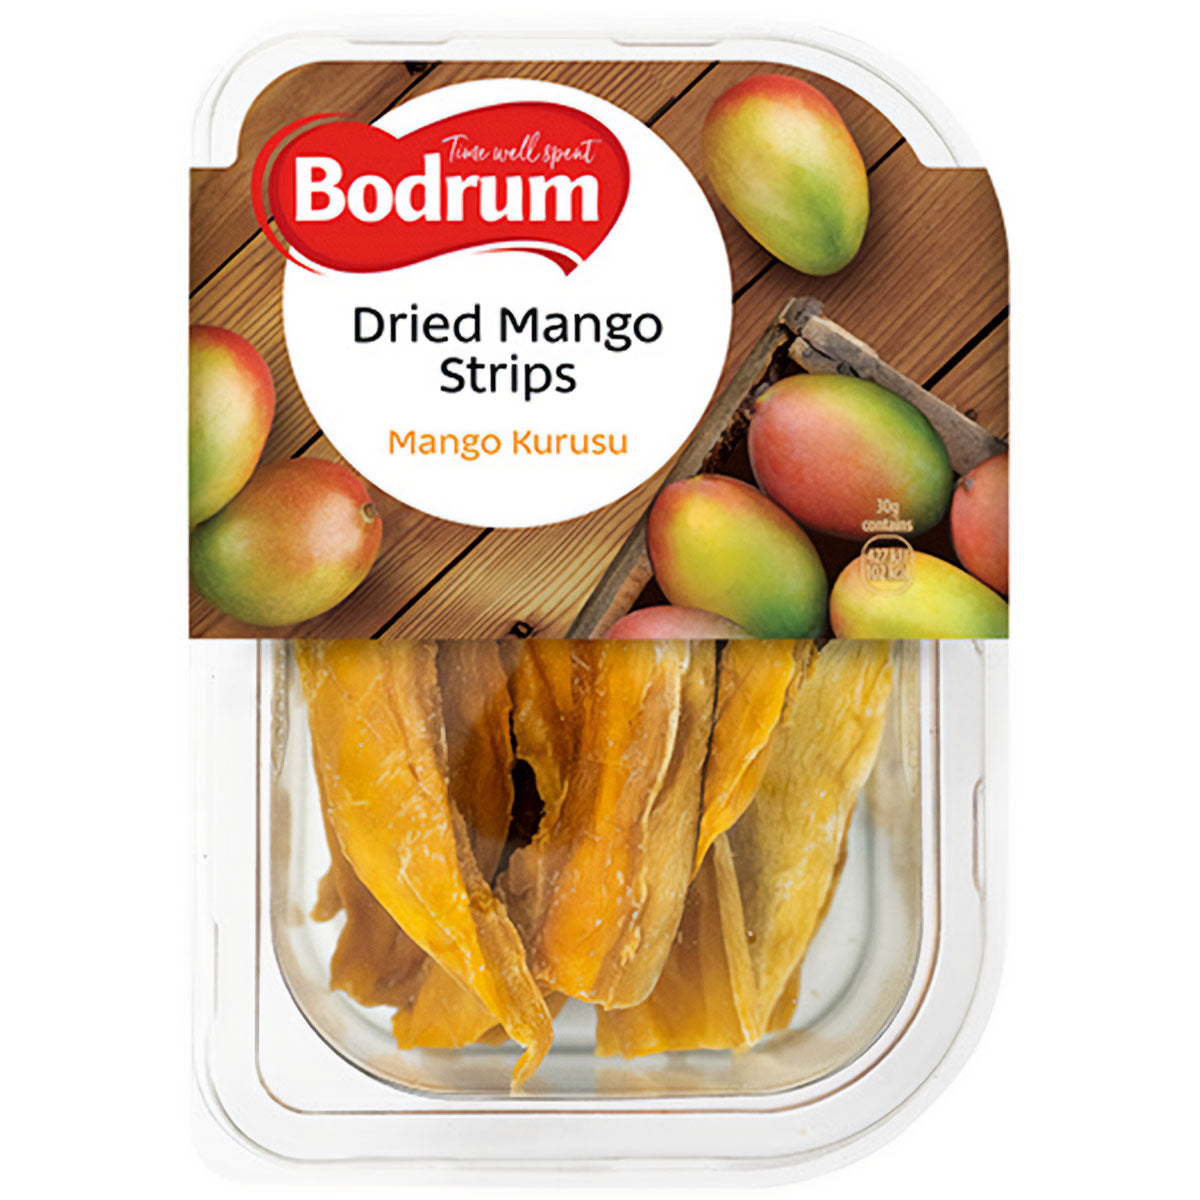 Bodrum - Dried Mango Strips - 150g - Continental Food Store